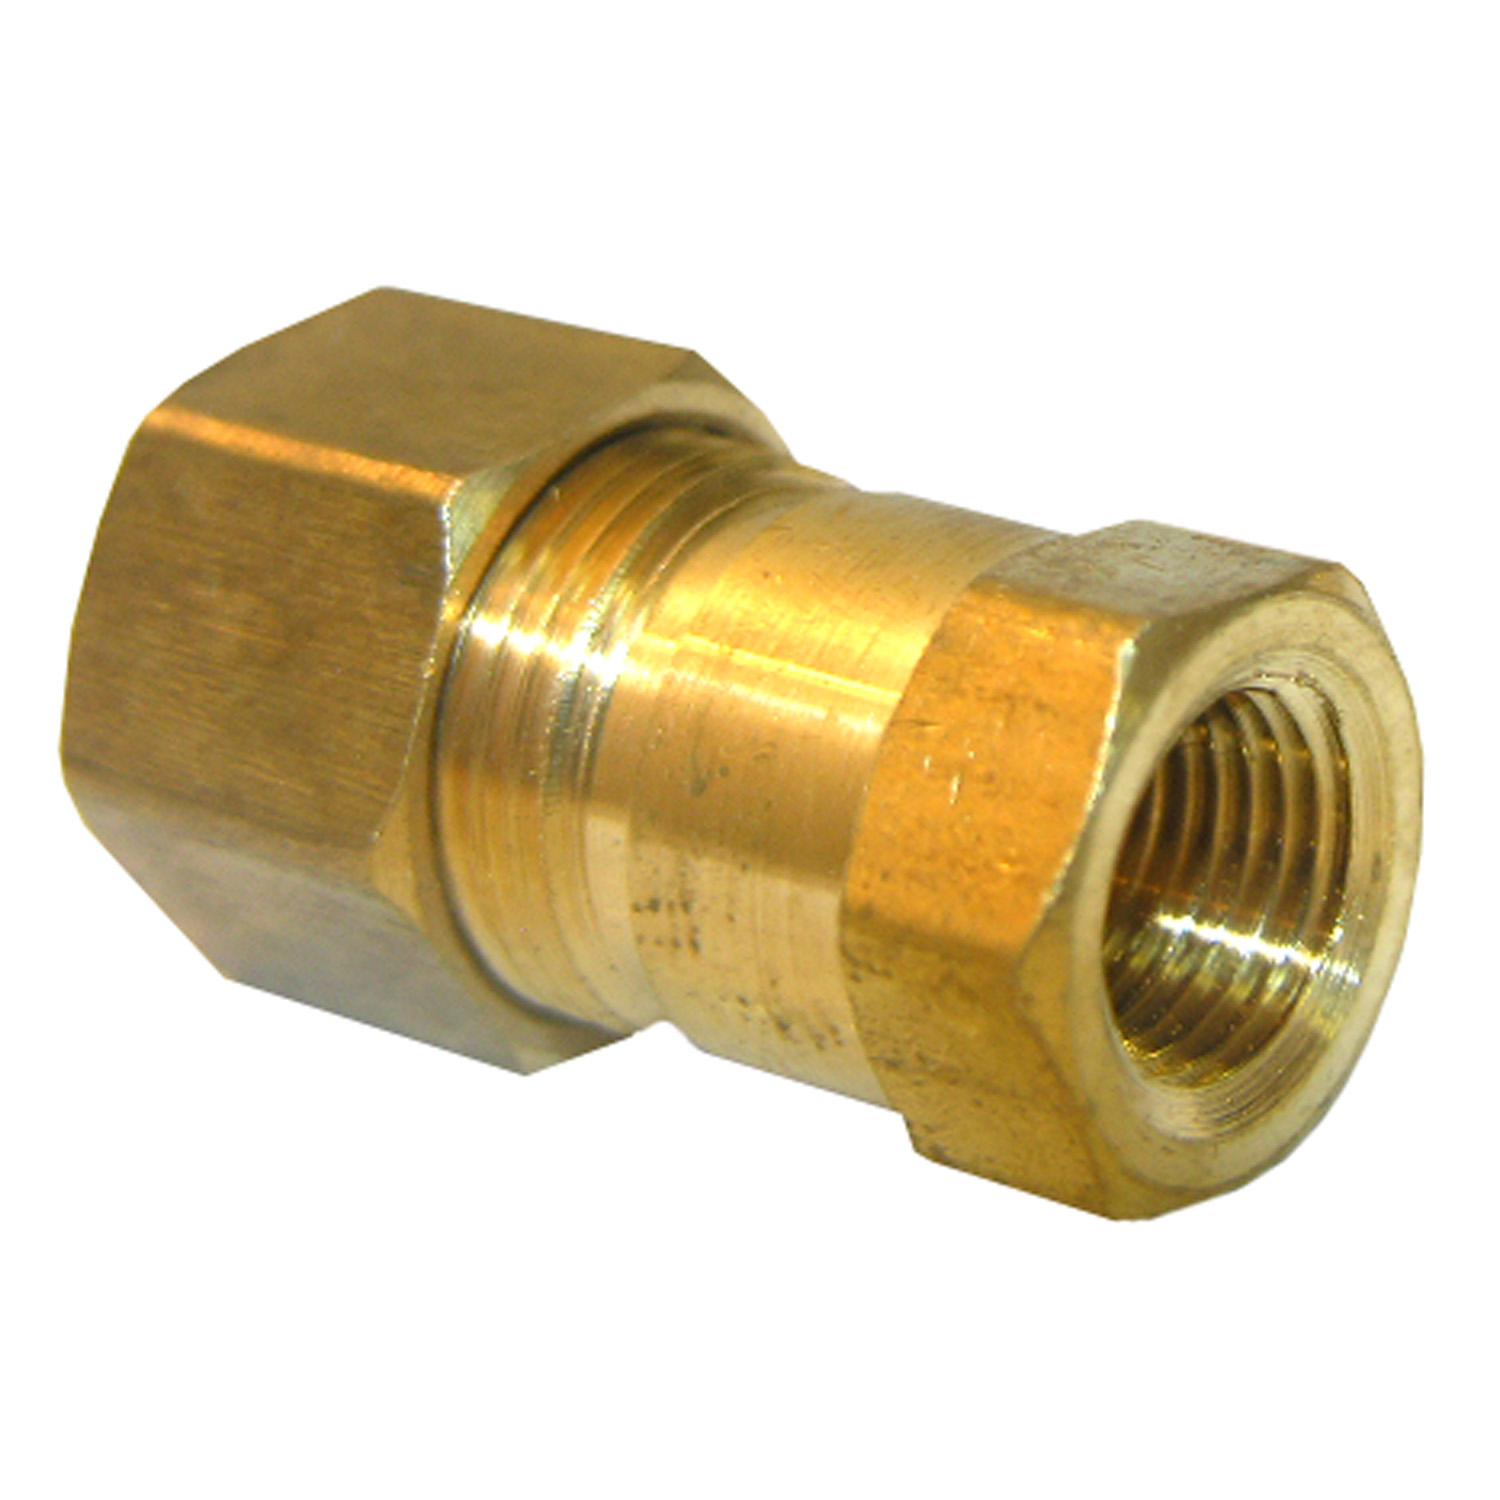 17-6633 Pipe Adapter, 3/8 x 1/4 in, Compression x FPT, Brass, 150 psi Pressure